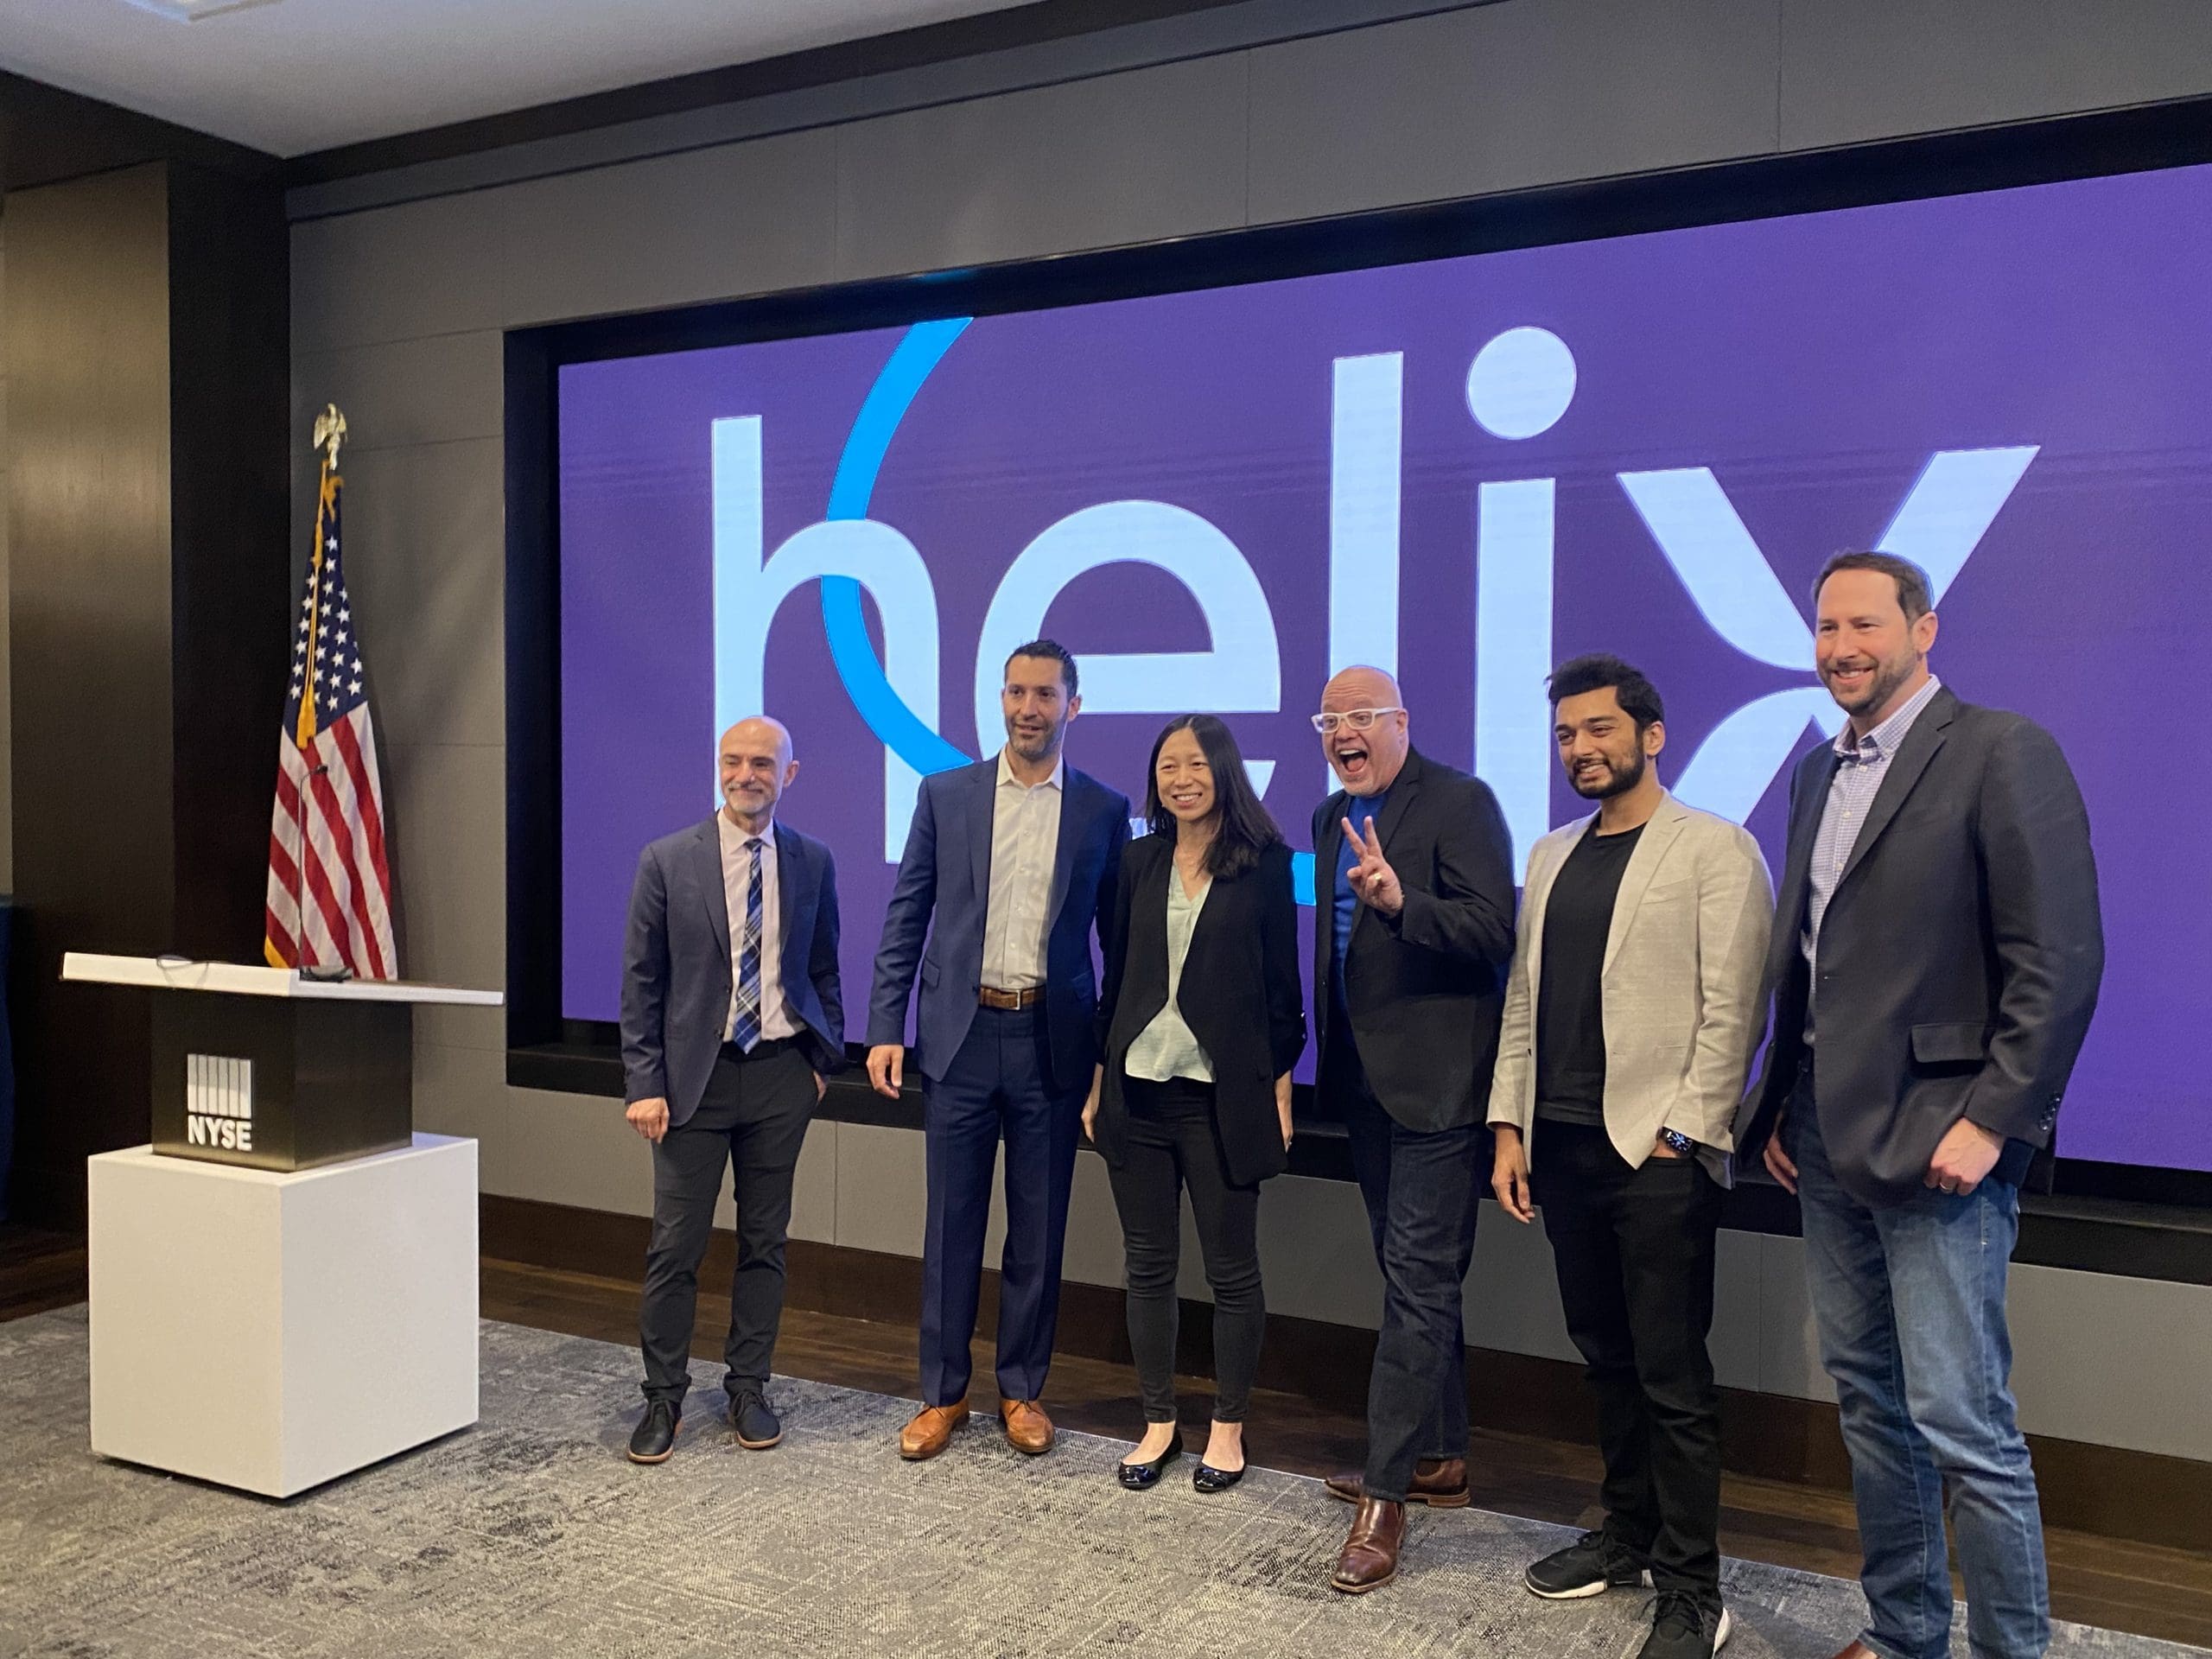 Q2 launches Helix brand